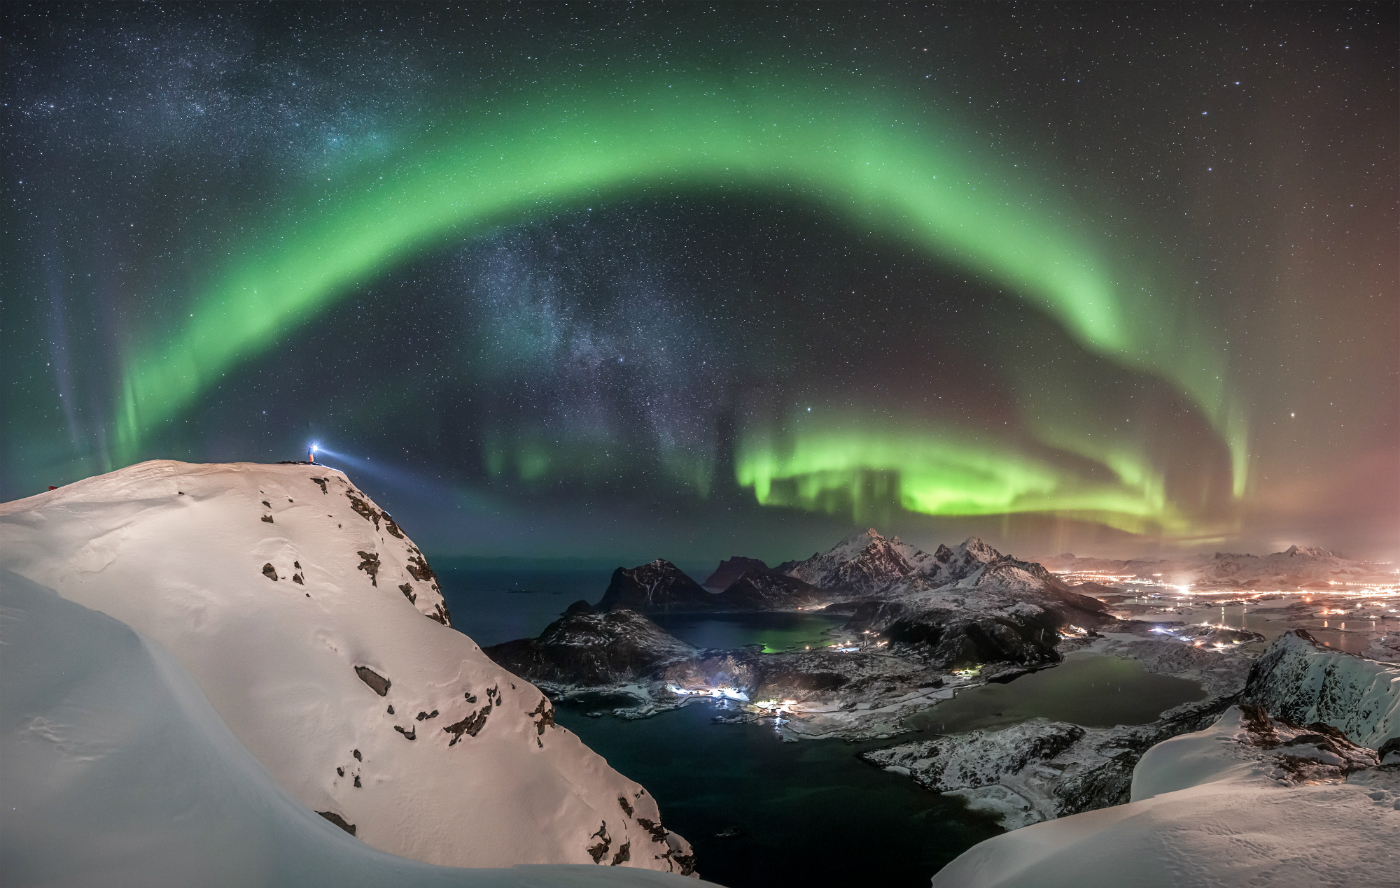 Astronomy Photographer of the Year 2019 winners